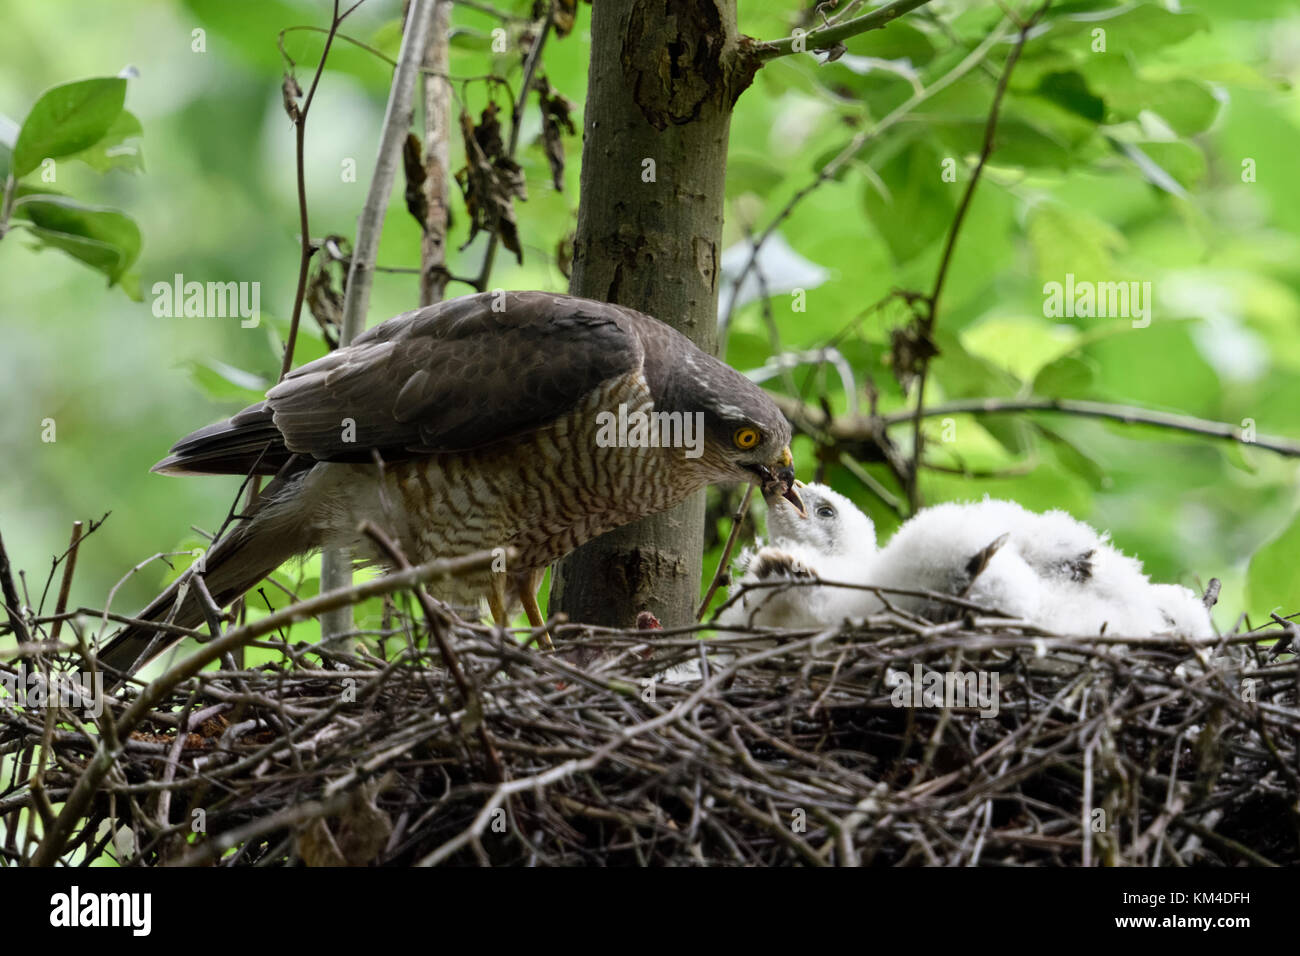 Sparrowhawk / Sperber ( Accipiter nisus ), female standing on its eyrie, feeding its hatchlings, young chicks, wildlife, Europe. Stock Photo